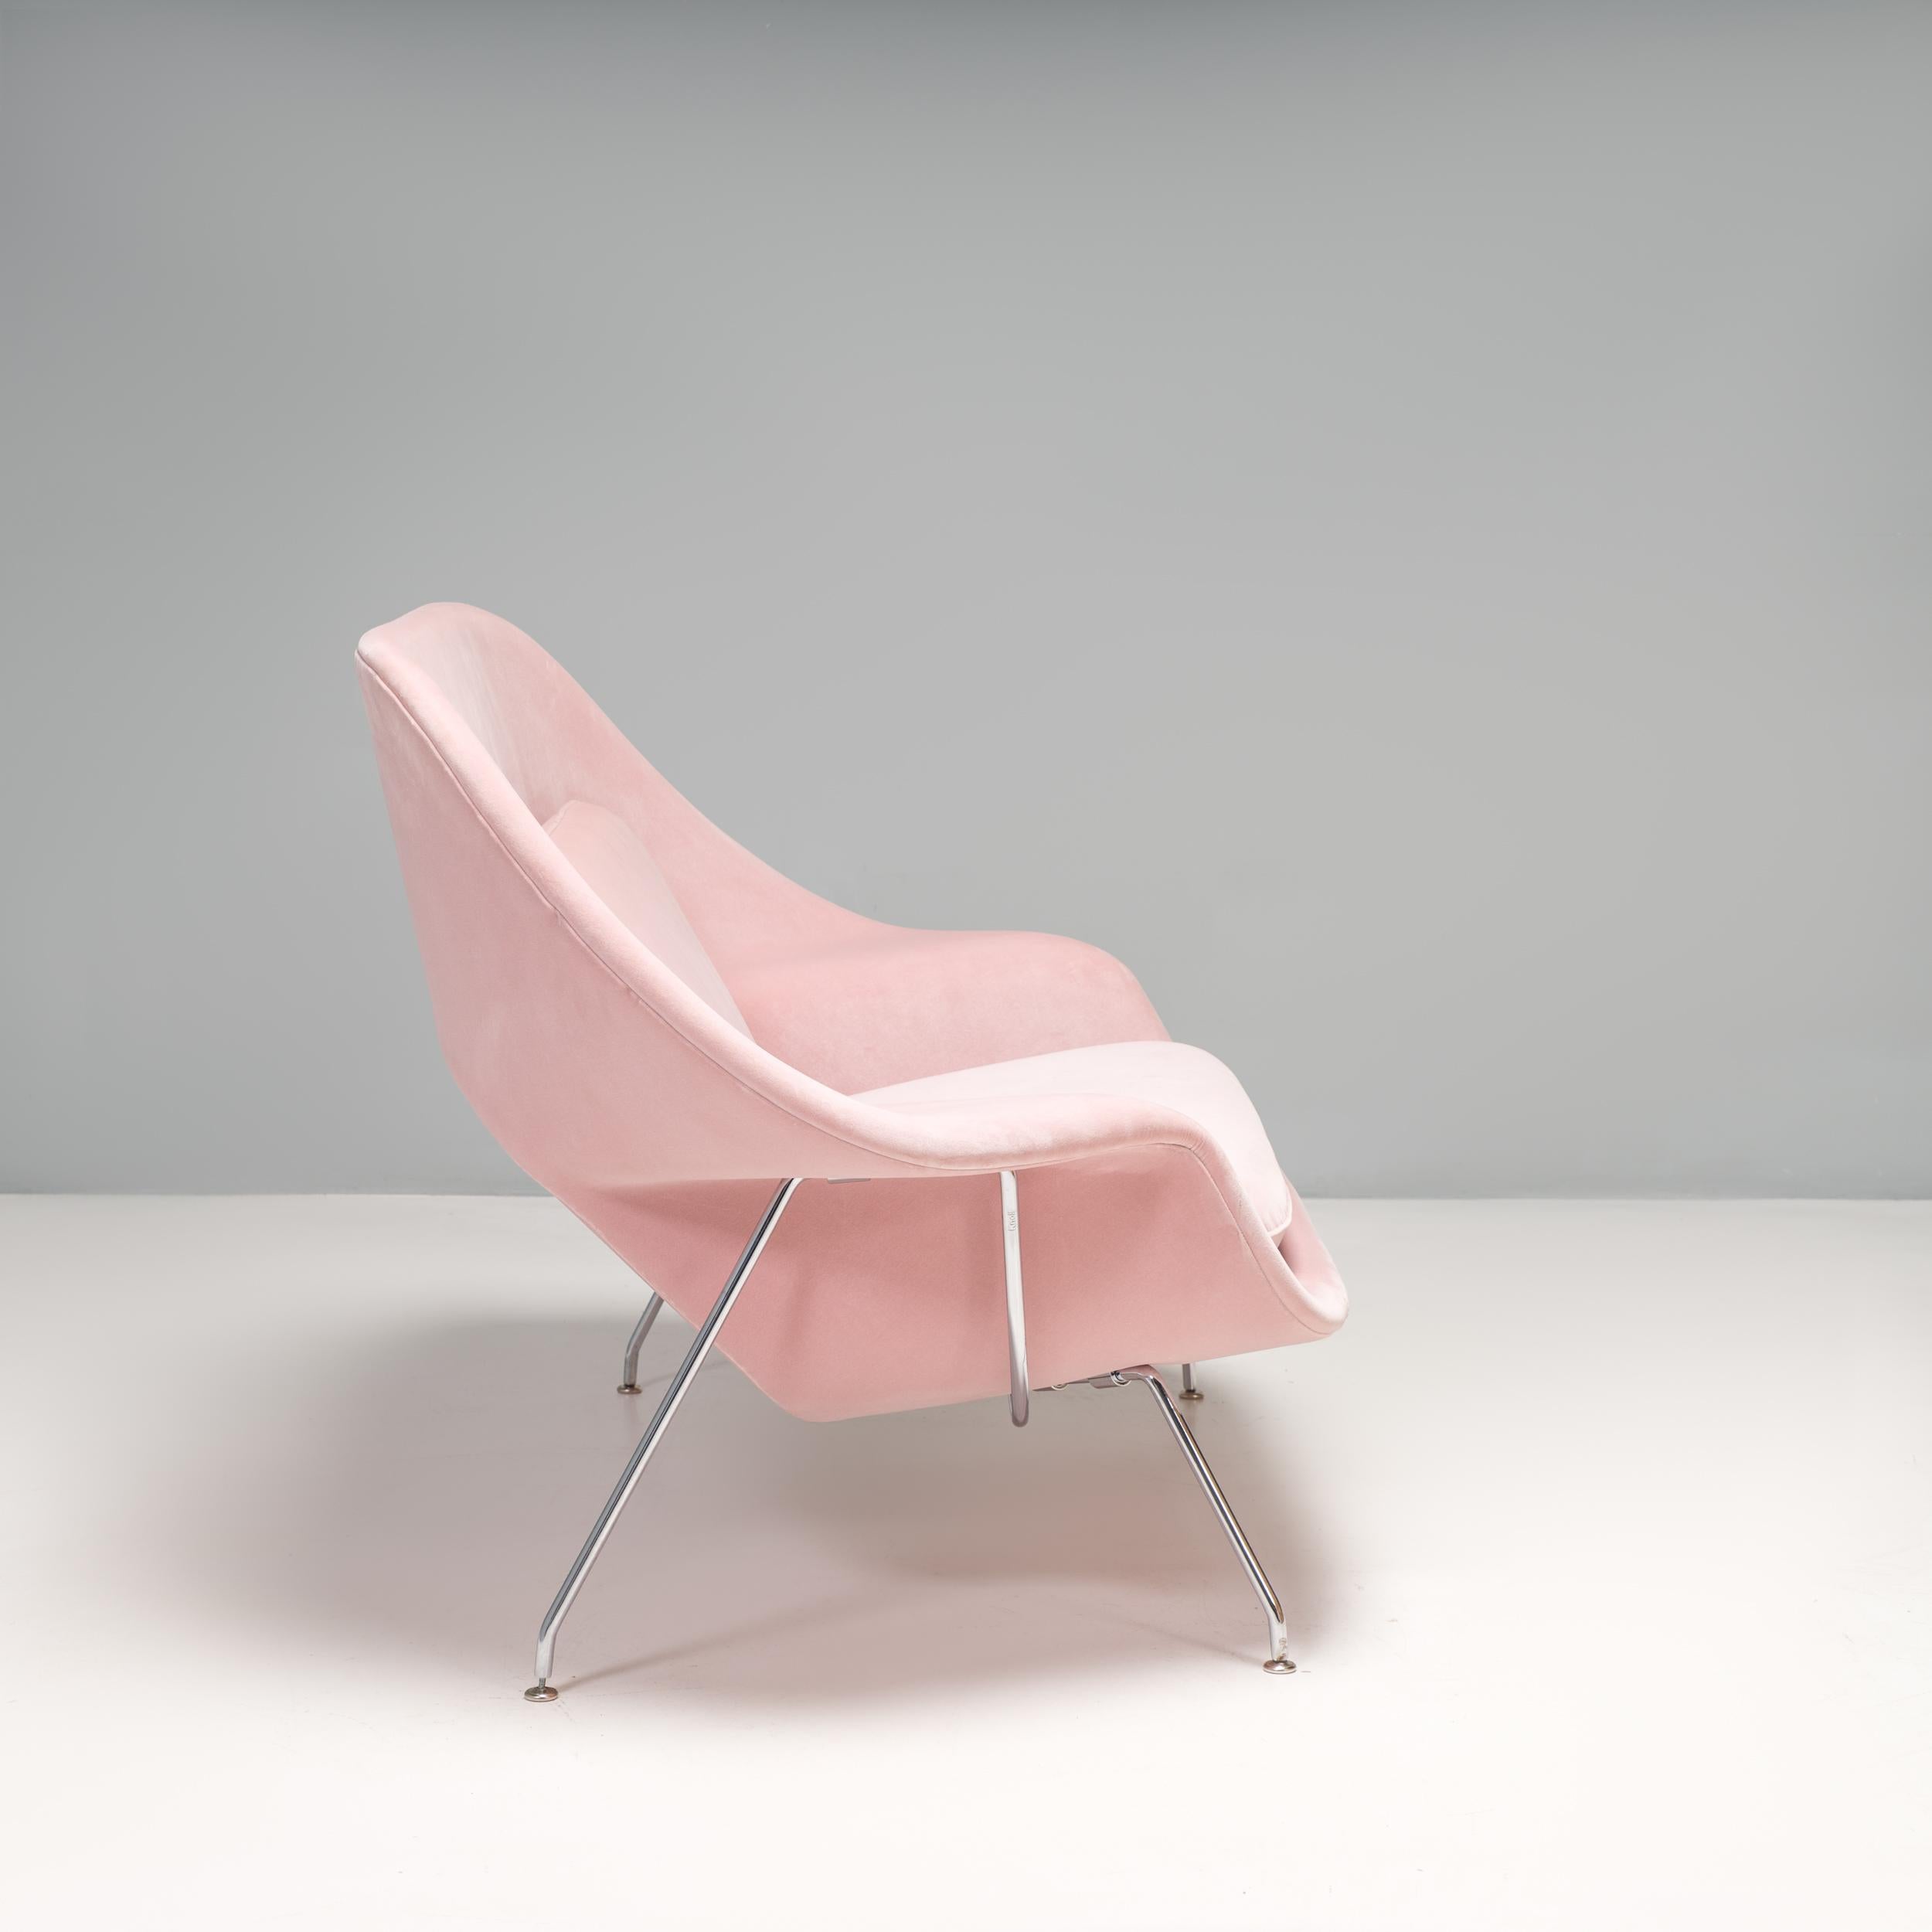 This iconic chair was designed by prolific designer Eero Saarinen in 1948. 
Eero Saarinen designed the ground breaking womb chair at Florence Knoll's request for “a chair that was like a basket full of pillows - something she could really curl up